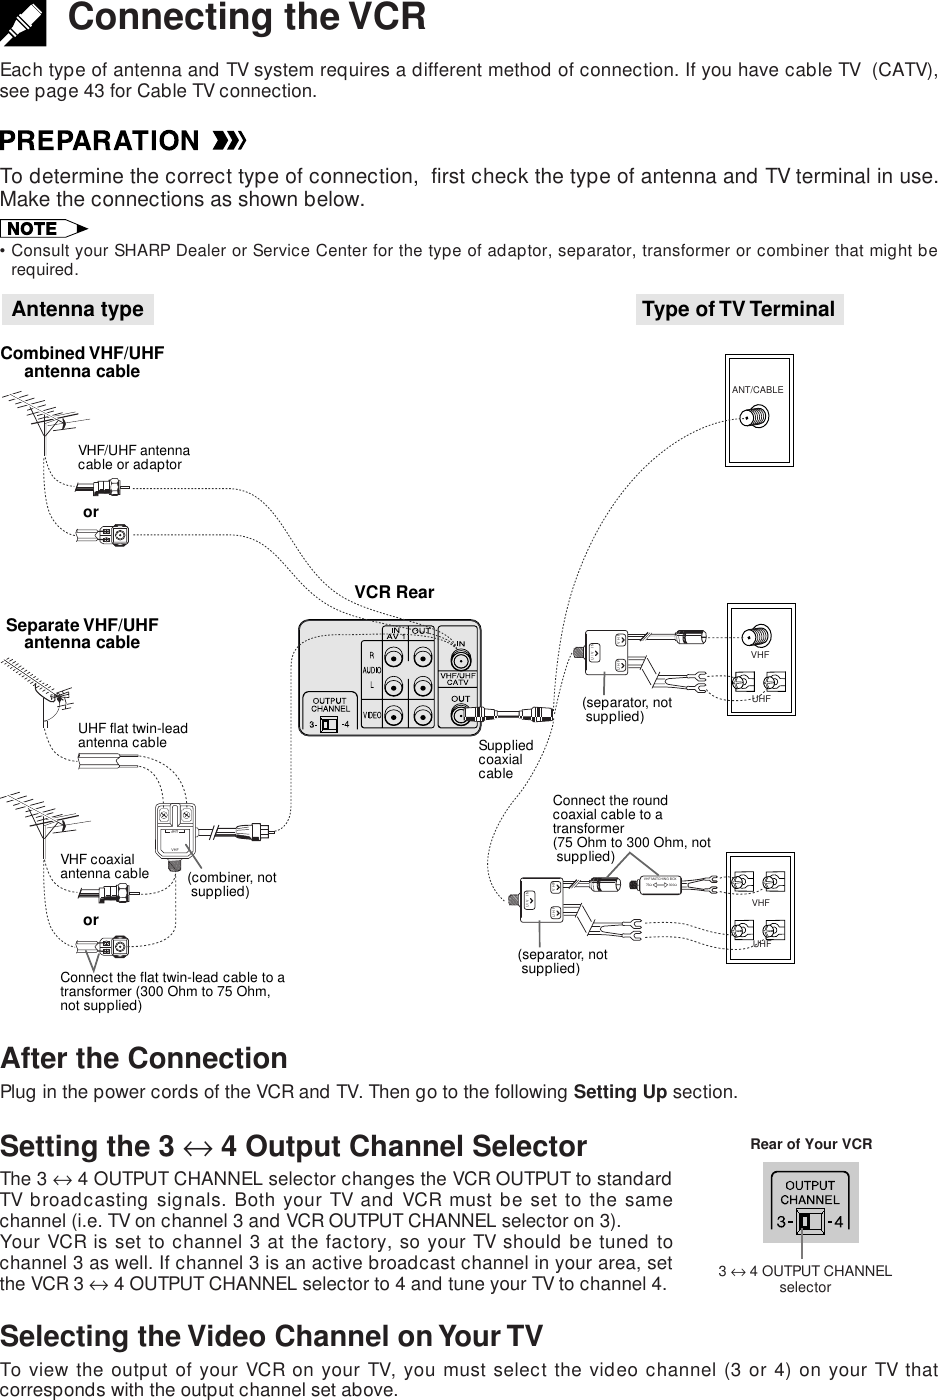 Setting the 3 ↔ 4 Output Channel SelectorThe 3 ↔ 4 OUTPUT CHANNEL selector changes the VCR OUTPUT to standardTV broadcasting signals. Both your TV and VCR must be set to the samechannel (i.e. TV on channel 3 and VCR OUTPUT CHANNEL selector on 3).Your VCR is set to channel 3 at the factory, so your TV should be tuned tochannel 3 as well. If channel 3 is an active broadcast channel in your area, setthe VCR 3 ↔ 4 OUTPUT CHANNEL selector to 4 and tune your TV to channel 4.Connecting the VCREach type of antenna and TV system requires a different method of connection. If you have cable TV  (CATV),see page 43 for Cable TV connection.To determine the correct type of connection,  first check the type of antenna and TV terminal in use.Make the connections as shown below.•Consult your SHARP Dealer or Service Center for the type of adaptor, separator, transformer or combiner that might berequired.After the ConnectionPlug in the power cords of the VCR and TV. Then go to the following Setting Up section.ANT/CABLEAntenna typeCombined VHF/UHFantenna cableVCR RearSeparate VHF/UHFantenna cableType of TV TerminalUHFVHFVHF UHFU/V INUHF VHFororVHF/UHF antennacable or adaptorUHF flat twin-leadantenna cable Suppliedcoaxialcable(separator, not supplied)(combiner, not supplied)VHF coaxialantenna cableConnect the flat twin-lead cable to atransformer (300 Ohm to 75 Ohm,not supplied)U/V INUHF VHFVHF MATCHING BOX75Ω300ΩConnect the roundcoaxial cable to a transformer(75 Ohm to 300 Ohm, not supplied)(separator, not supplied)VHF UHF3 ↔ 4 OUTPUT CHANNELselectorRear of Your VCRSelecting the Video Channel on Your TVTo view the output of your VCR on your TV, you must select the video channel (3 or 4) on your TV thatcorresponds with the output channel set above.